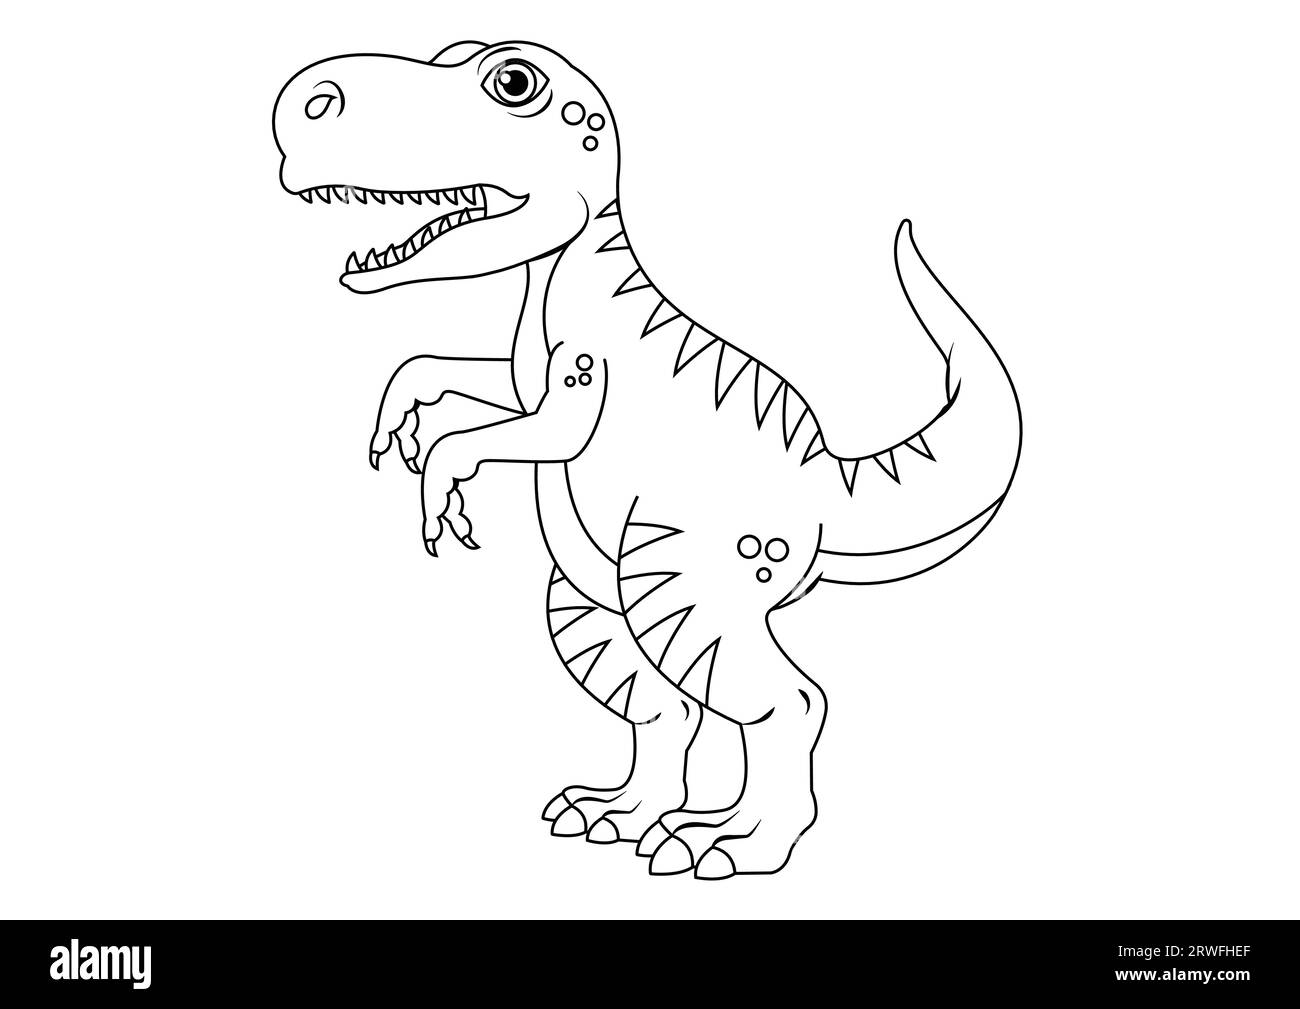 Black and White T-rex Dinosaur Cartoon Character Vector. Coloring Page of a T-rex Dinosaur Stock Vector